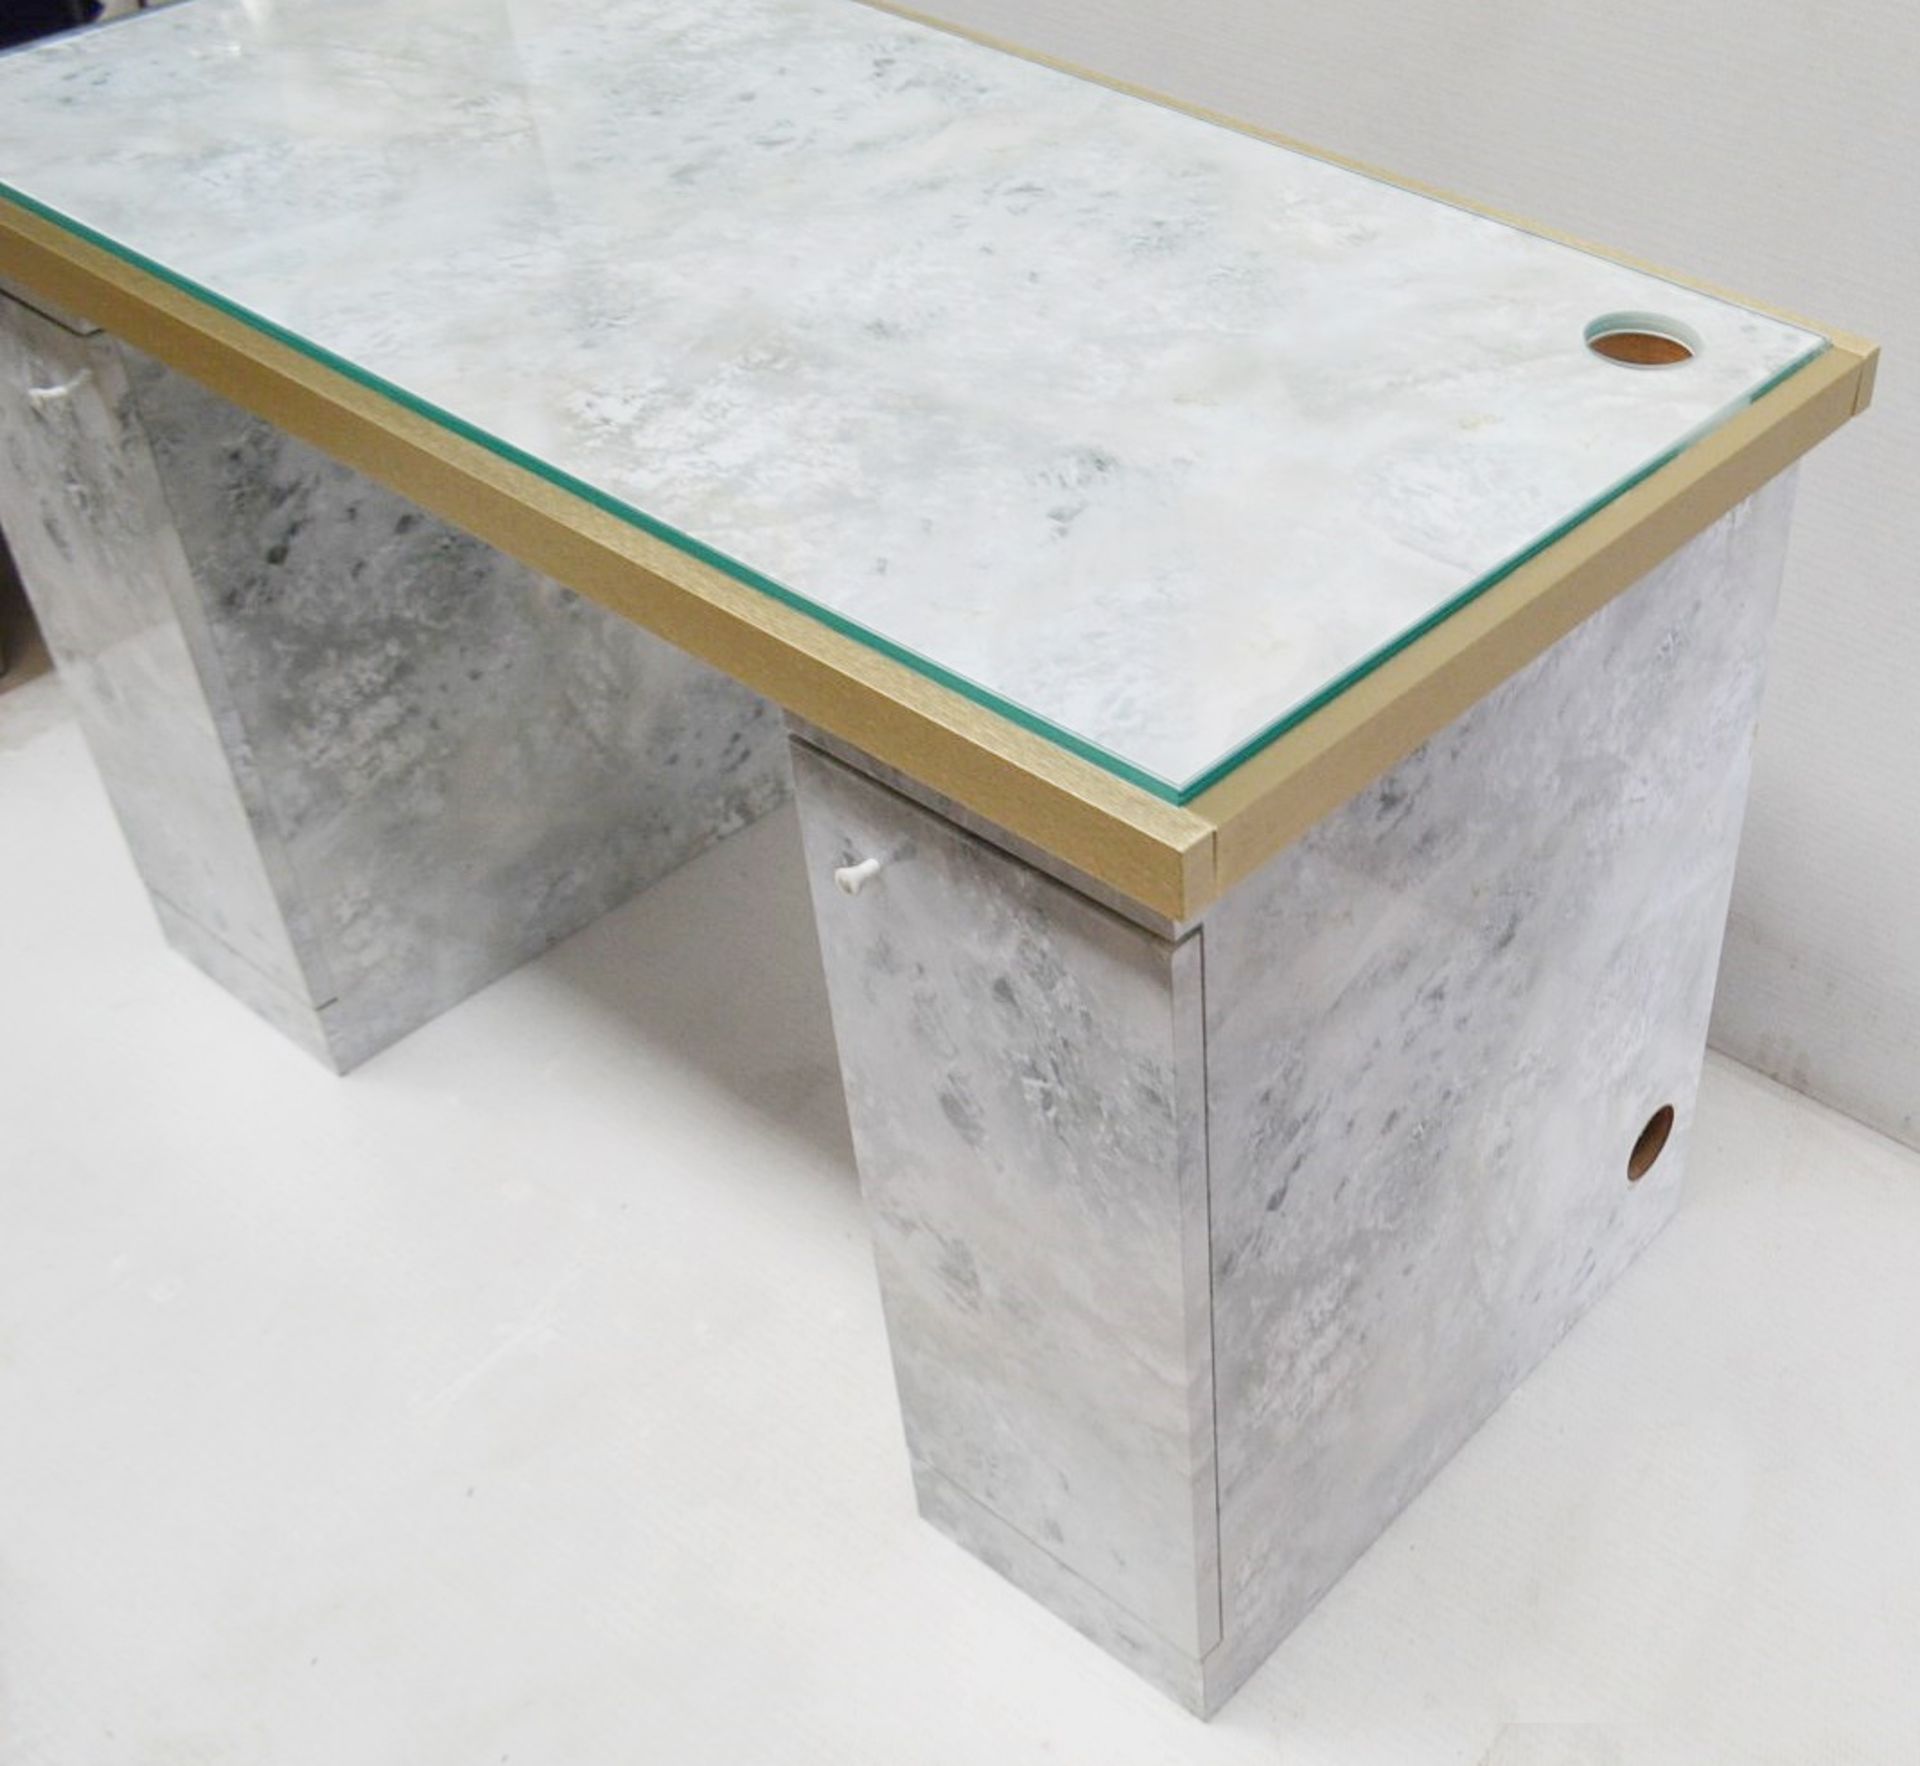 1 x BALDI Designer Retail Display Table / Desk Featuring A Marble Effect Aesthetic - Image 5 of 8